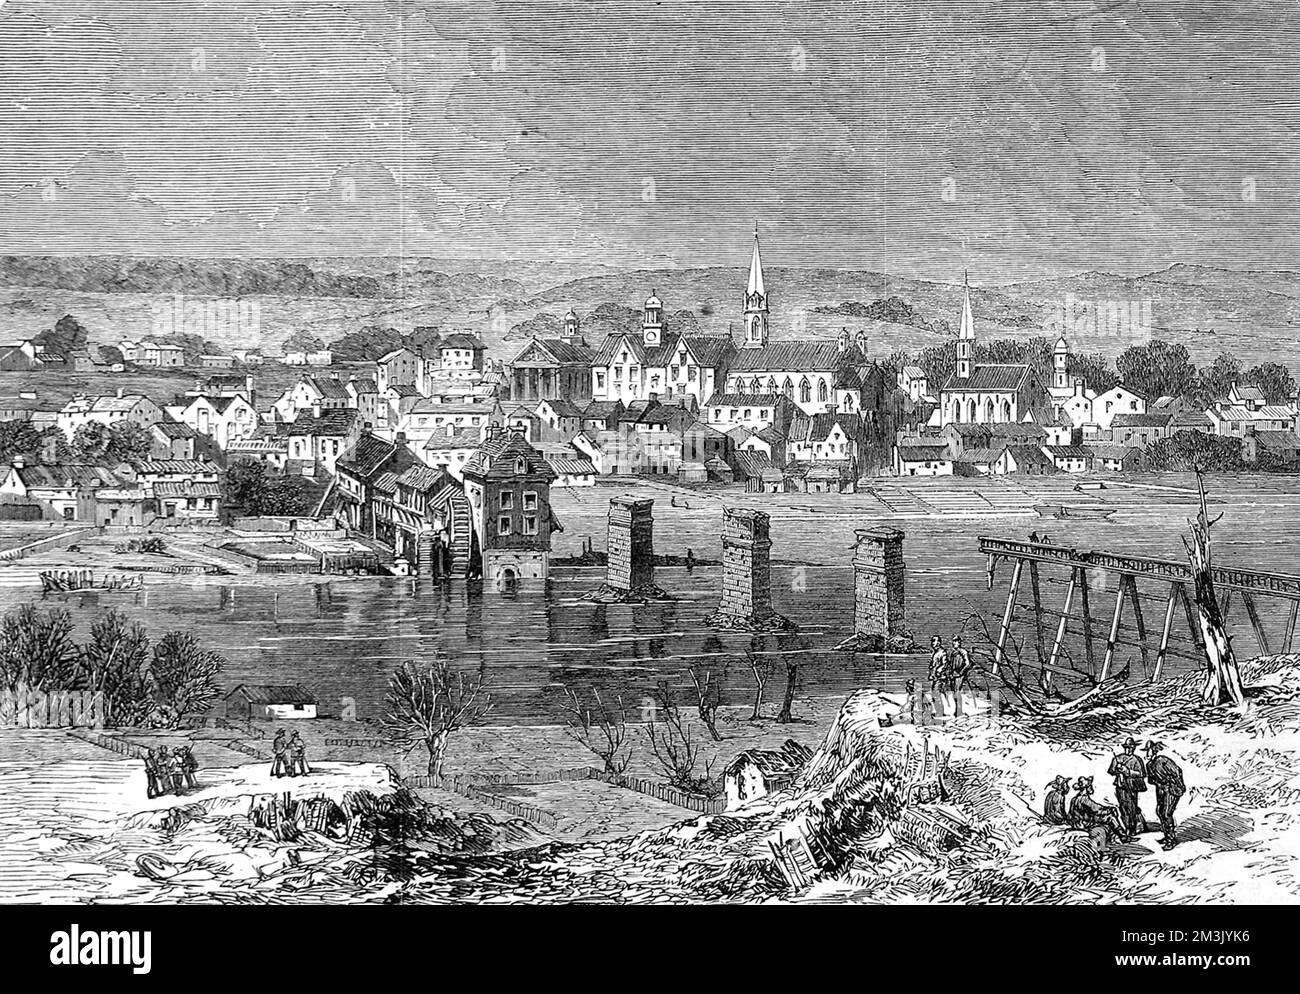 Scene of the battle between the Federals and the Confederates. Fredericksburg devastated after the battle which took place on December 13th 1862. The Confederates held the town against General Burnside's troops who suffered over 12,000 casualties.     Date: 1863 Stock Photo